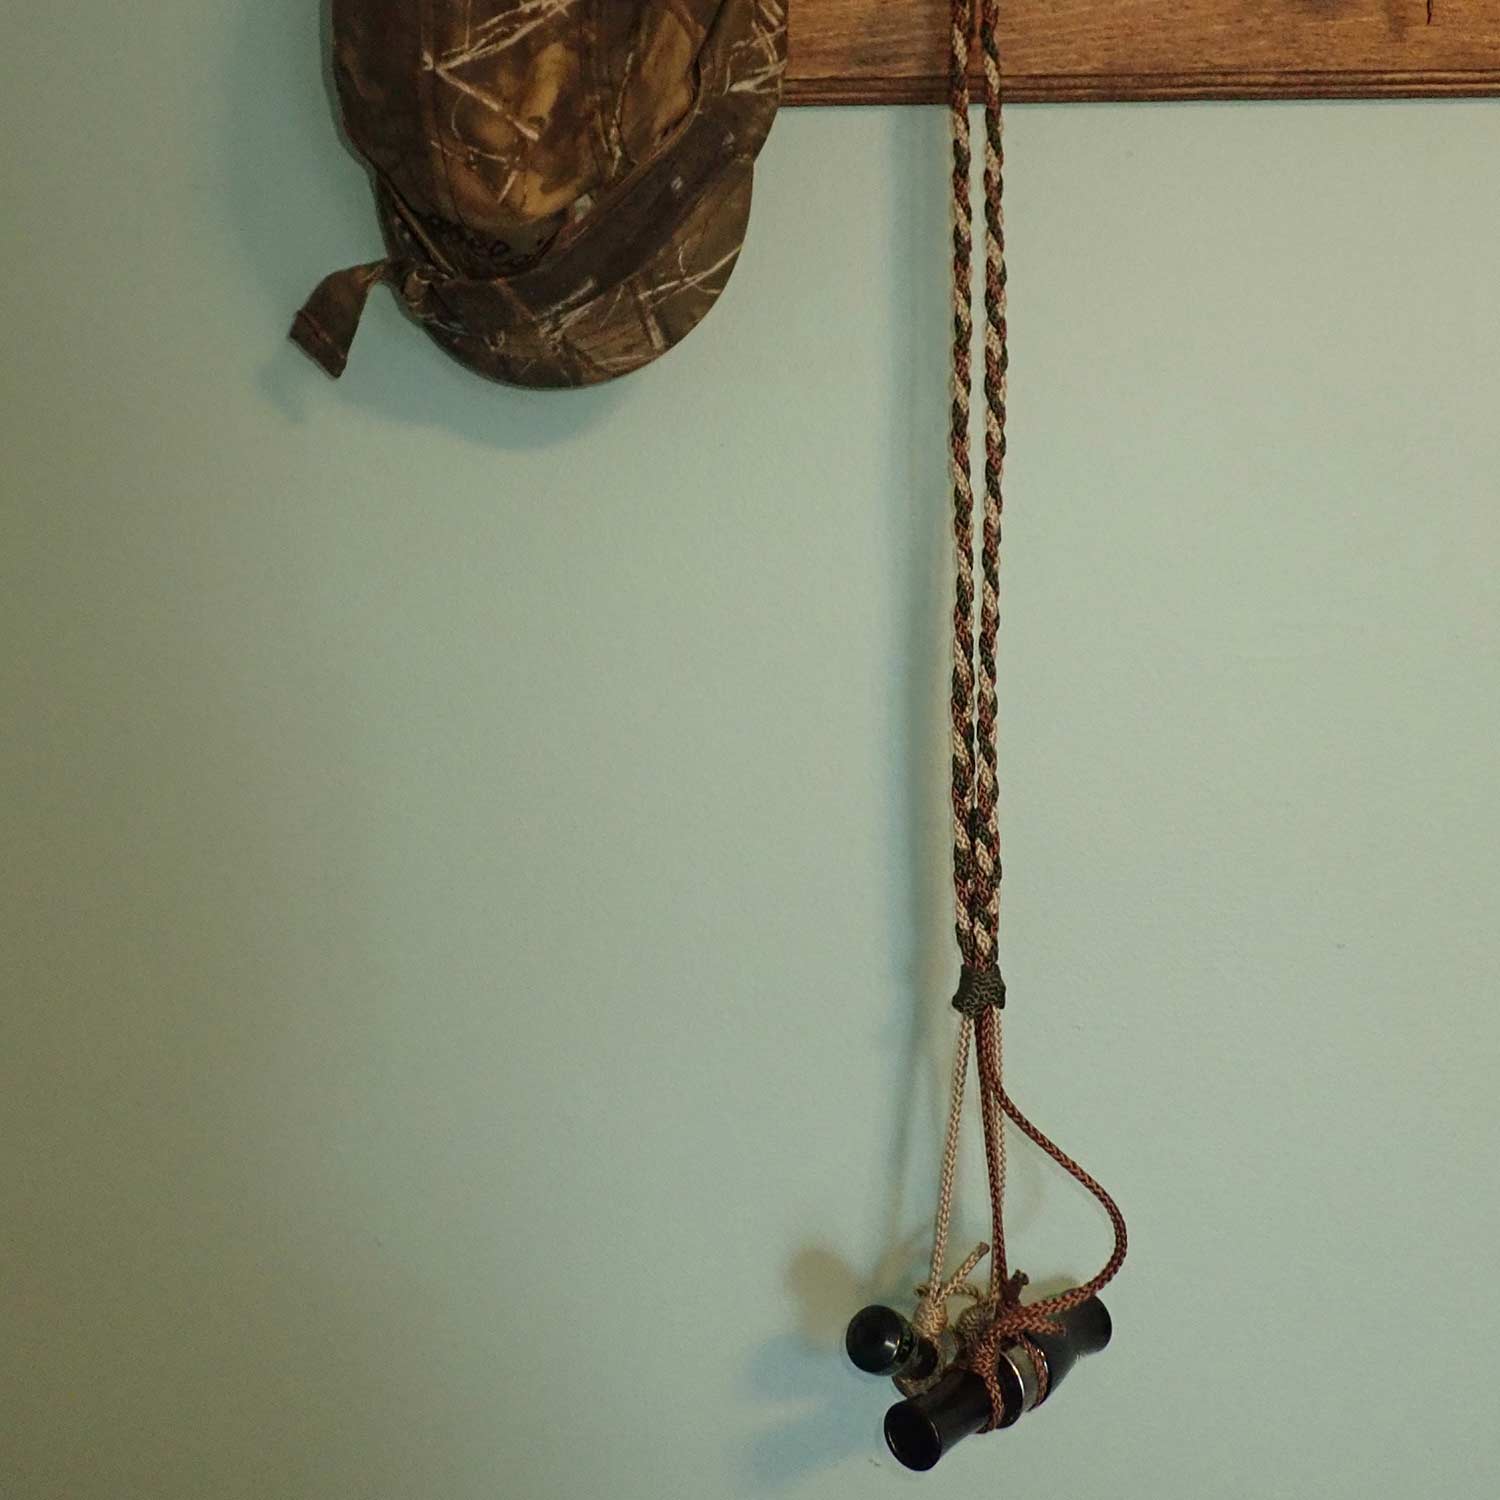 A duck call hanging from a lanyard.